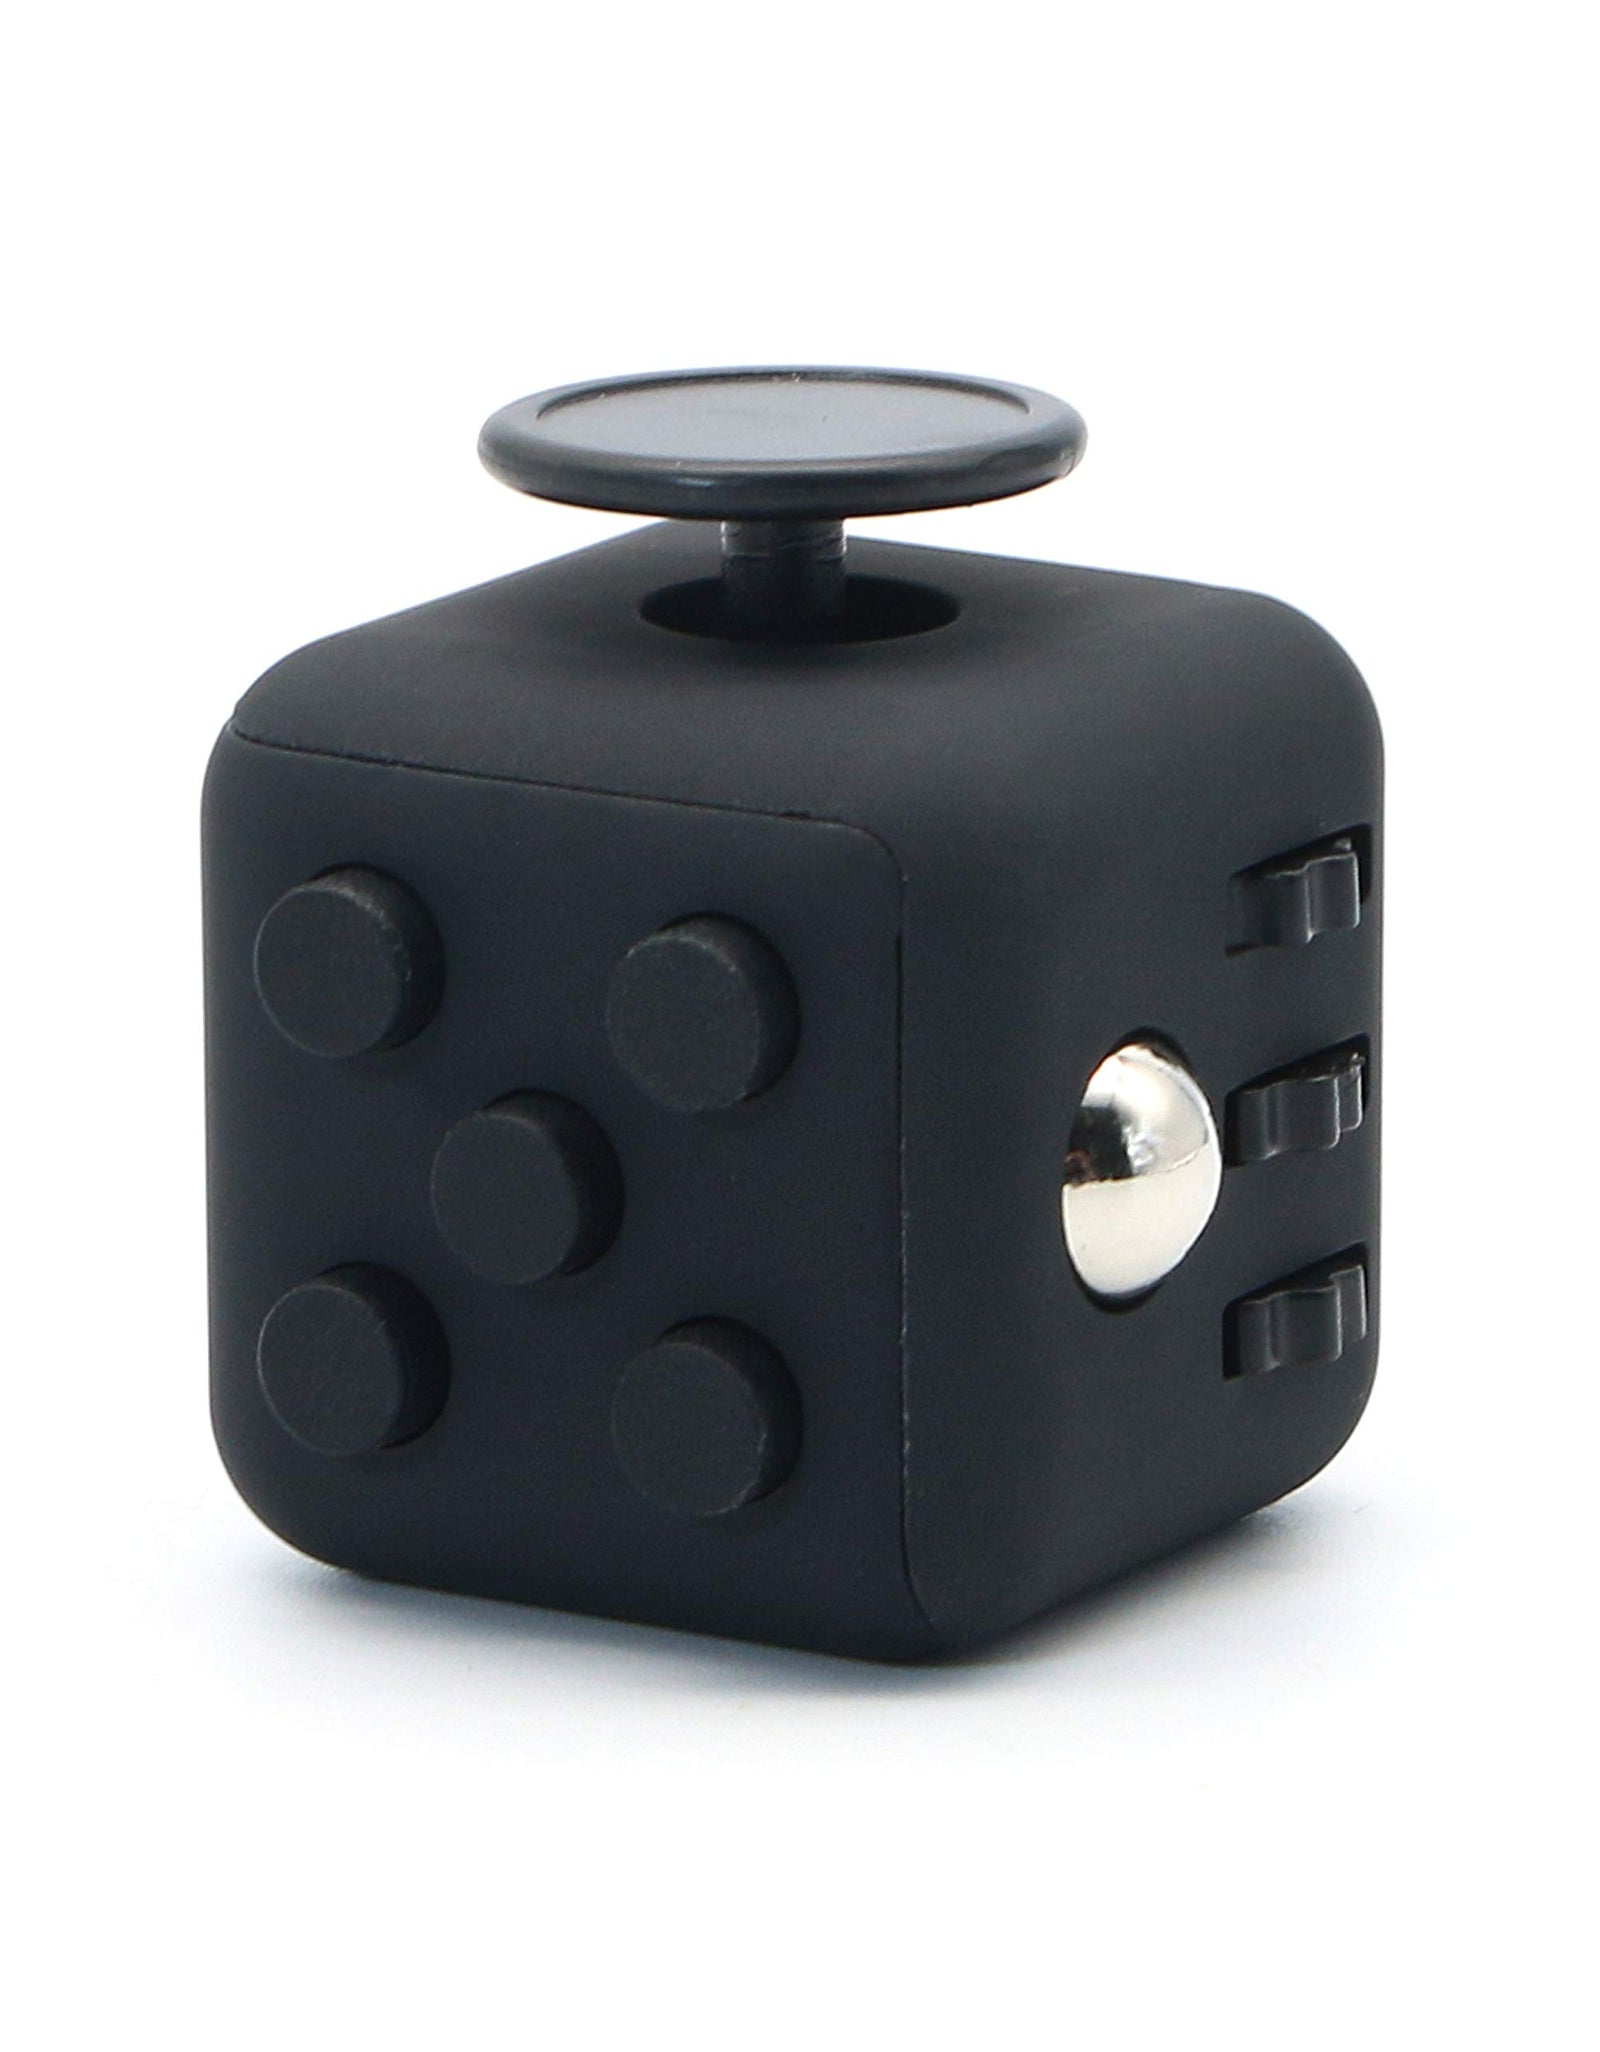 Appash Fidget Cube Stress Anxiety Pressure Relieving Toy Great for Adults and Children[Gift Idea][Relaxing Toy][Stress Reliever][Soft Material] (Black&Black)